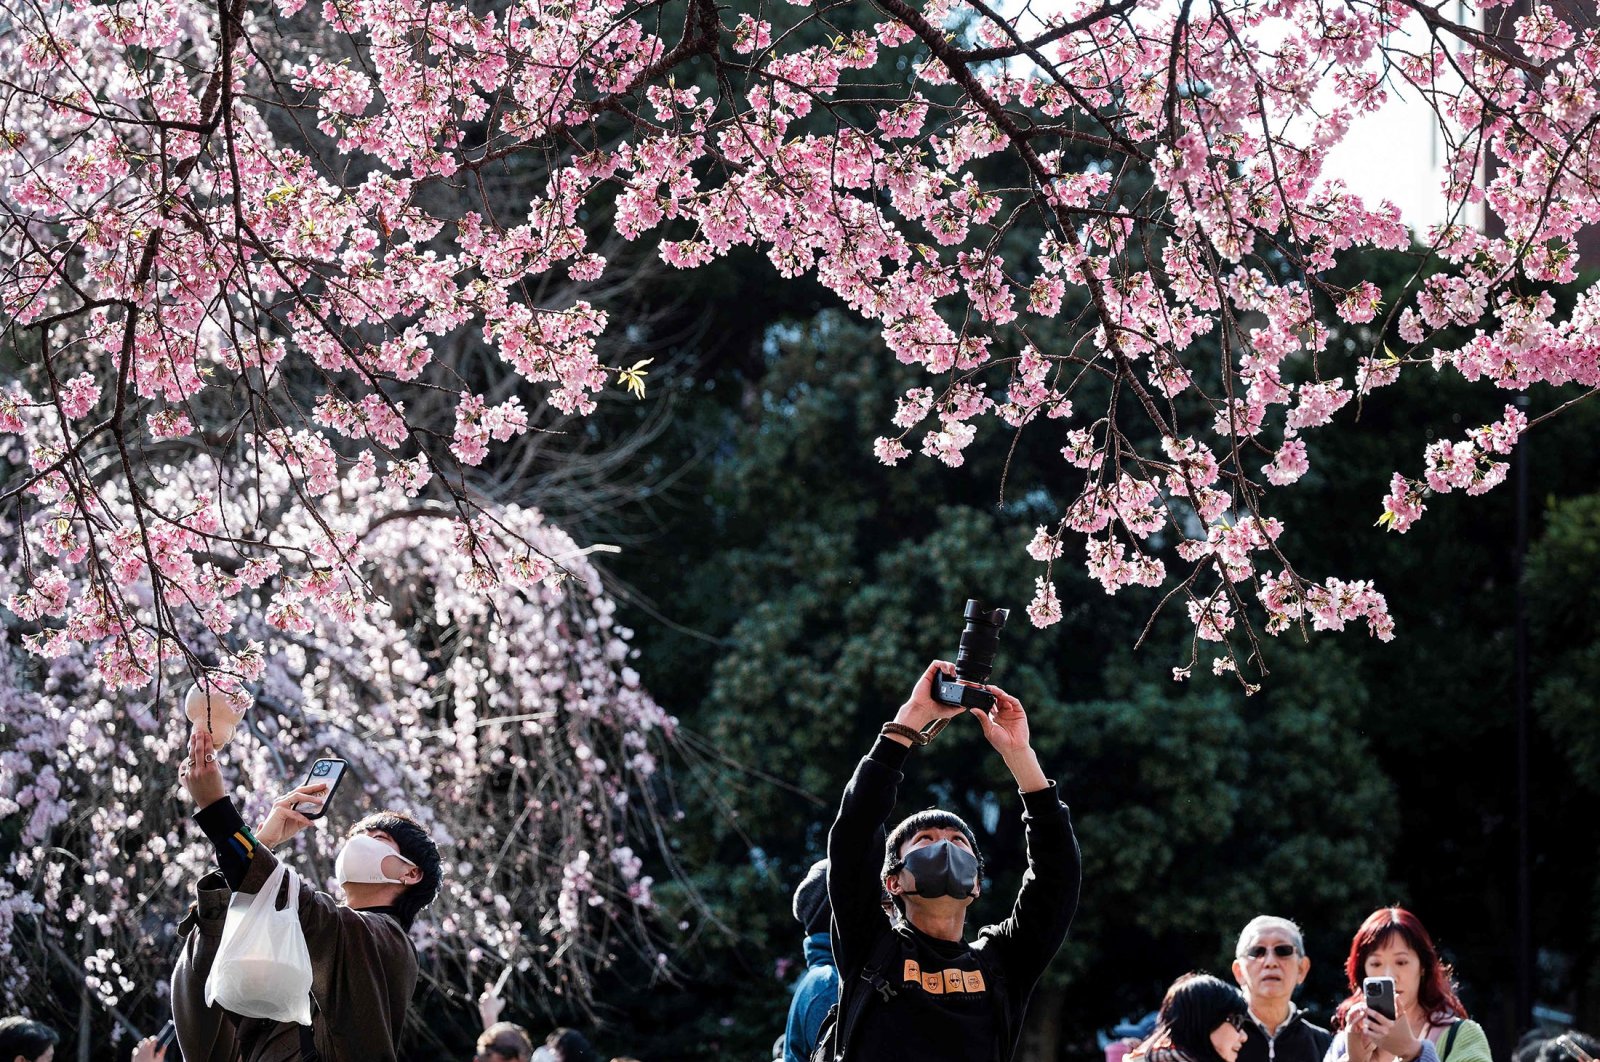 People take photos as they come out to Ueno Park to see the early cherry blossoms in Tokyo, Japan, March 14, 2023. (AFP Photo)